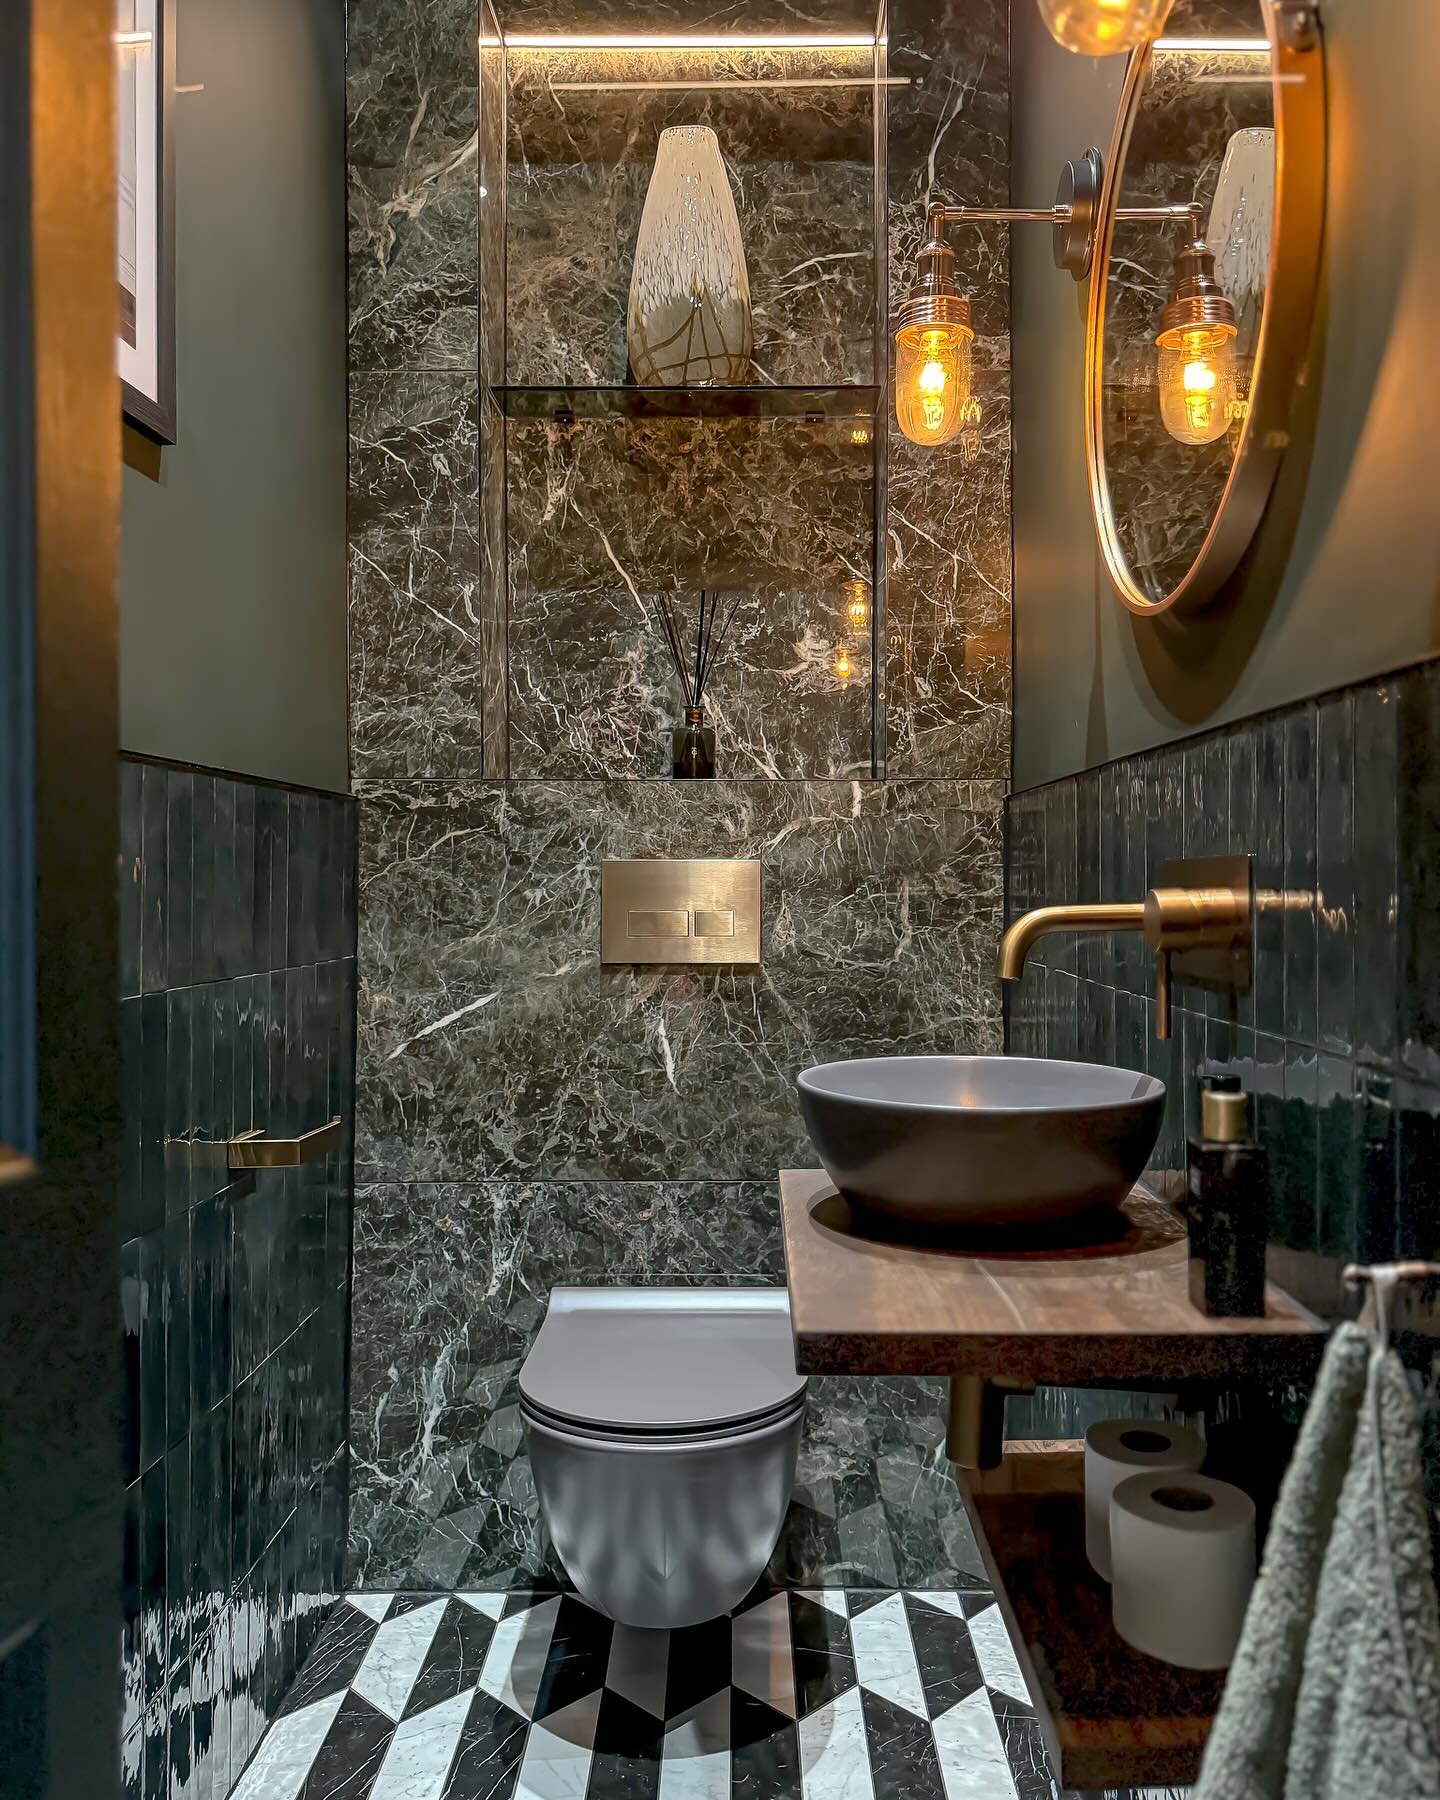 At North Arch Bathrooms, we take great pride in our design expertise. Whether it's crafting the charming and cozy or the luxurious and high-end spaces, our designers possess the skill and versatility to create for any style.

Design.
Supply.
Install.